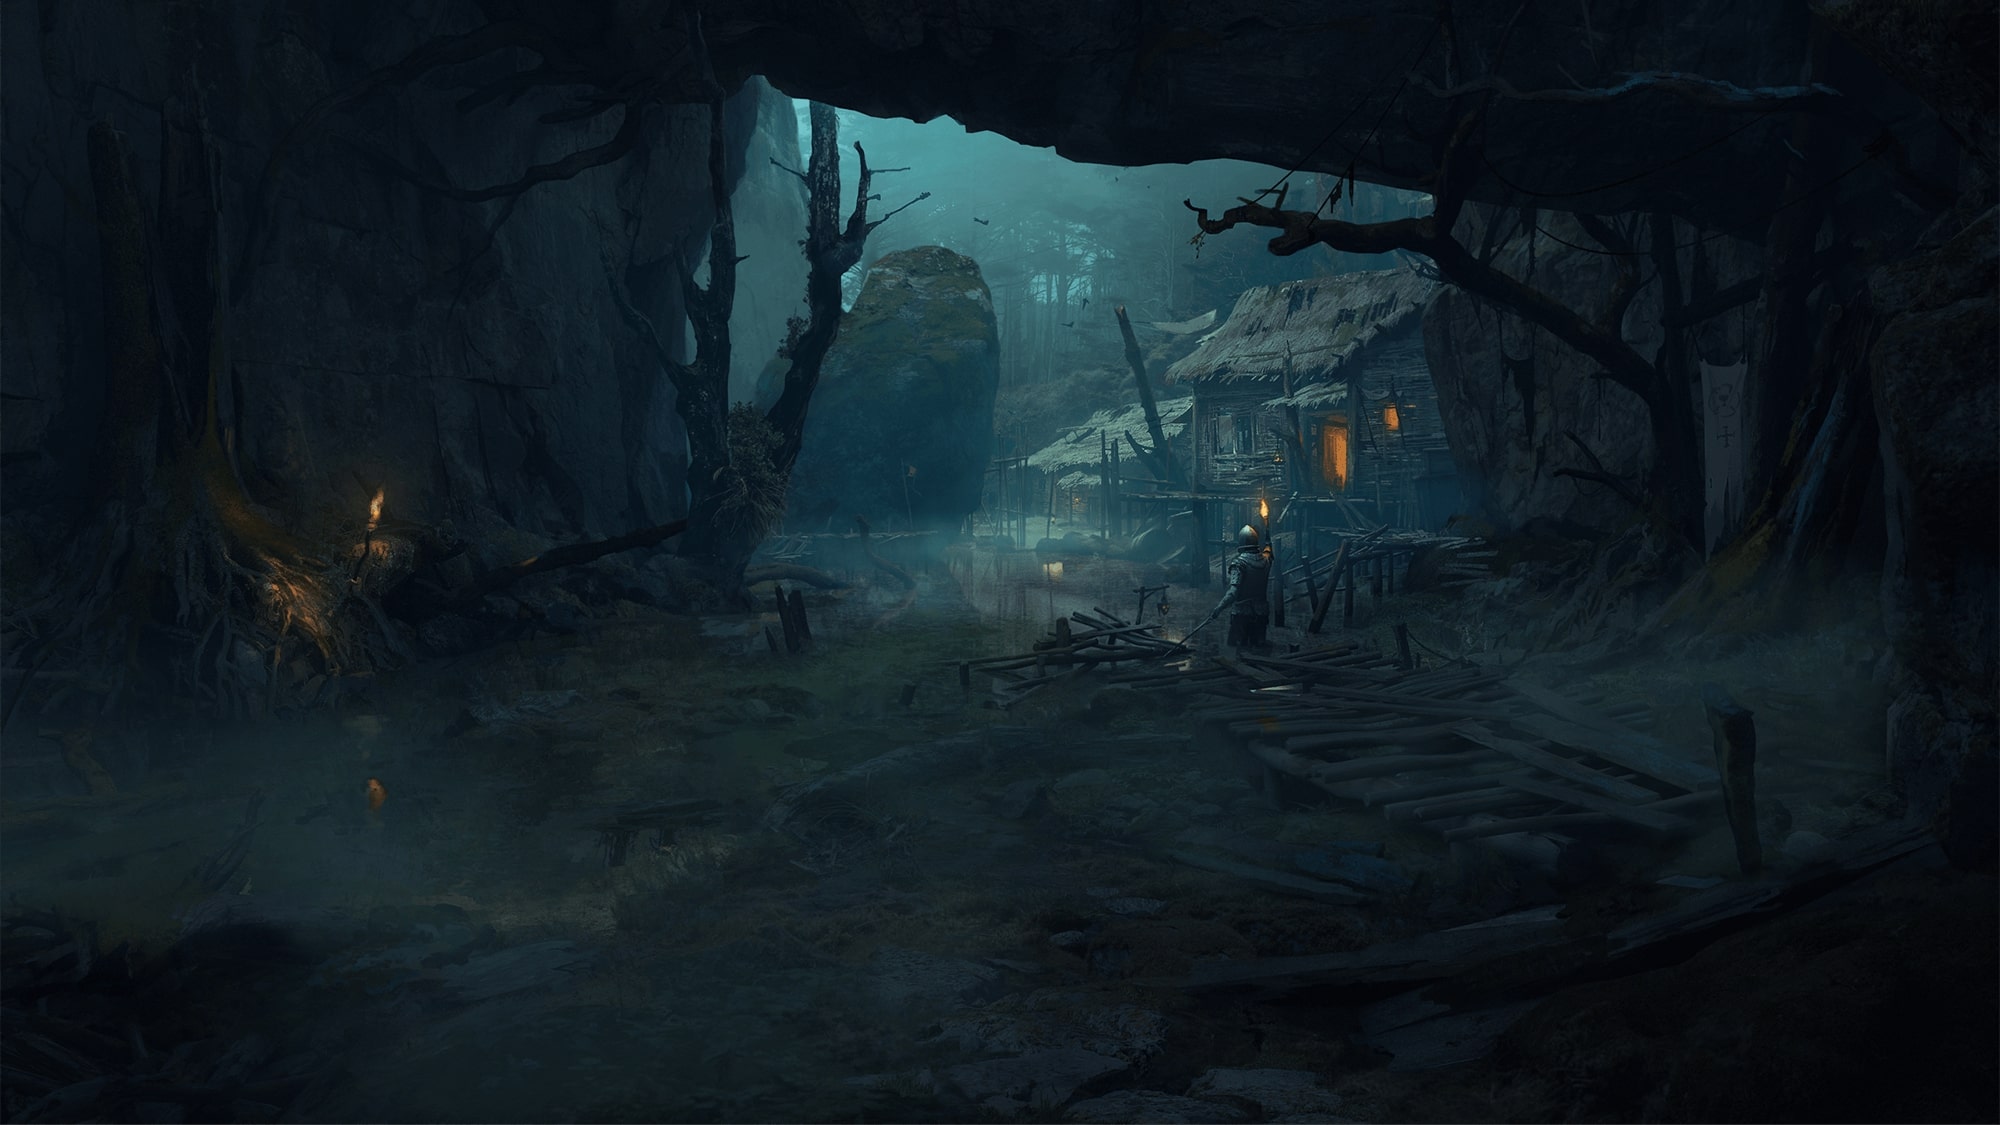 The lone cottage maybe inviting in the swamps of Umbral, but what horrors lie within? From the world of The Lords of the Fallen